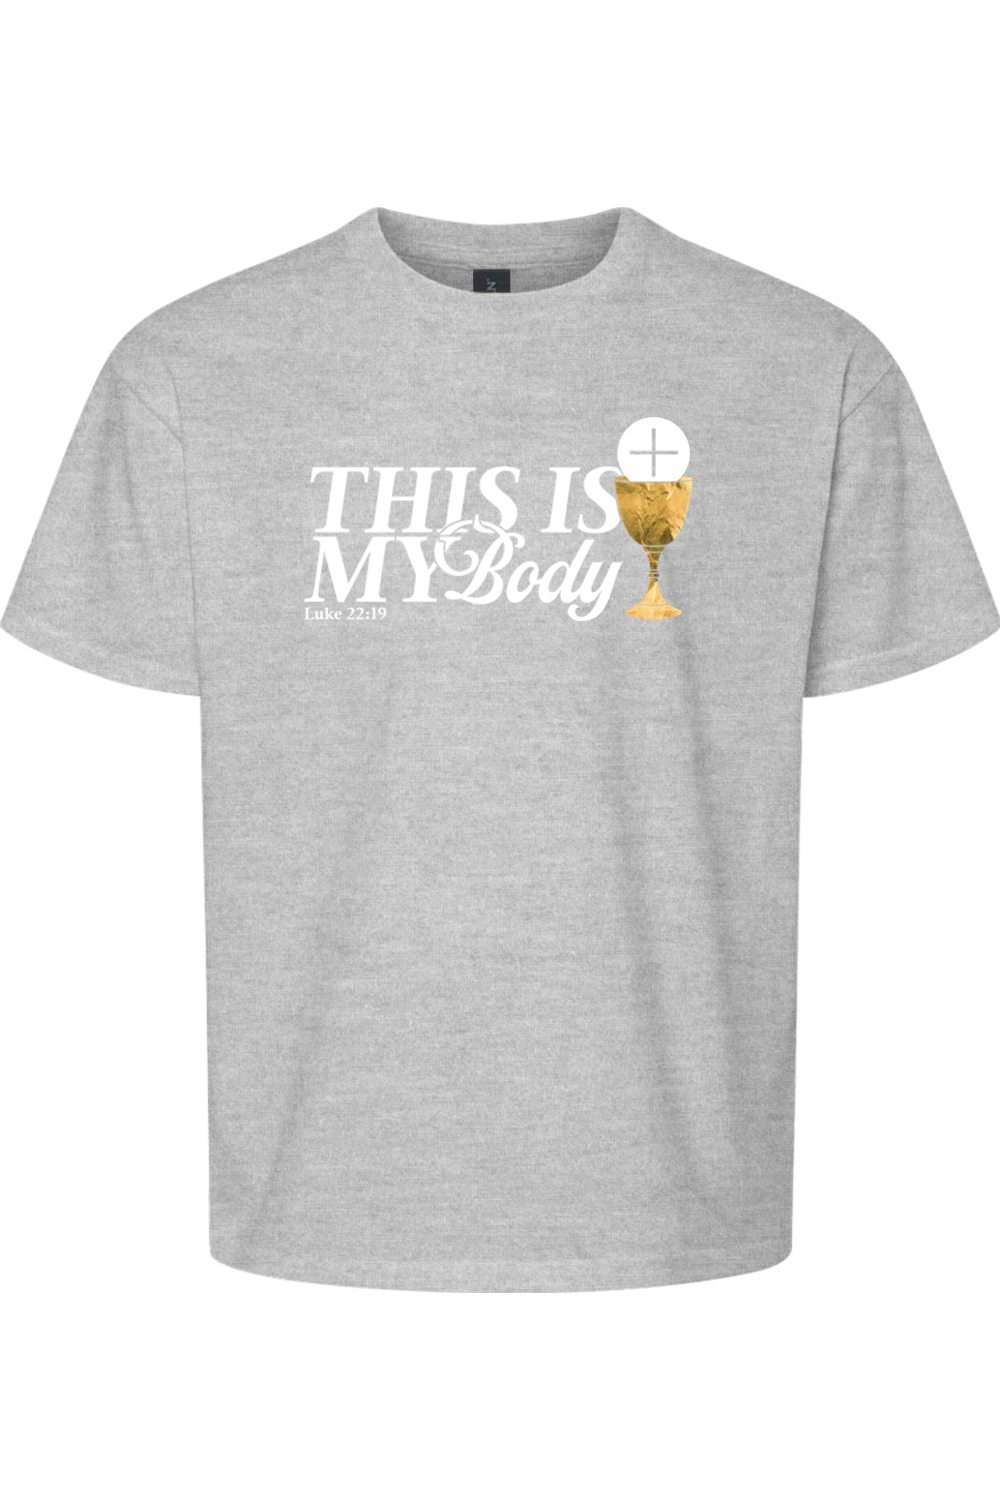 This is My Body, Chalice - Luke 22:19 T-shirt - youth